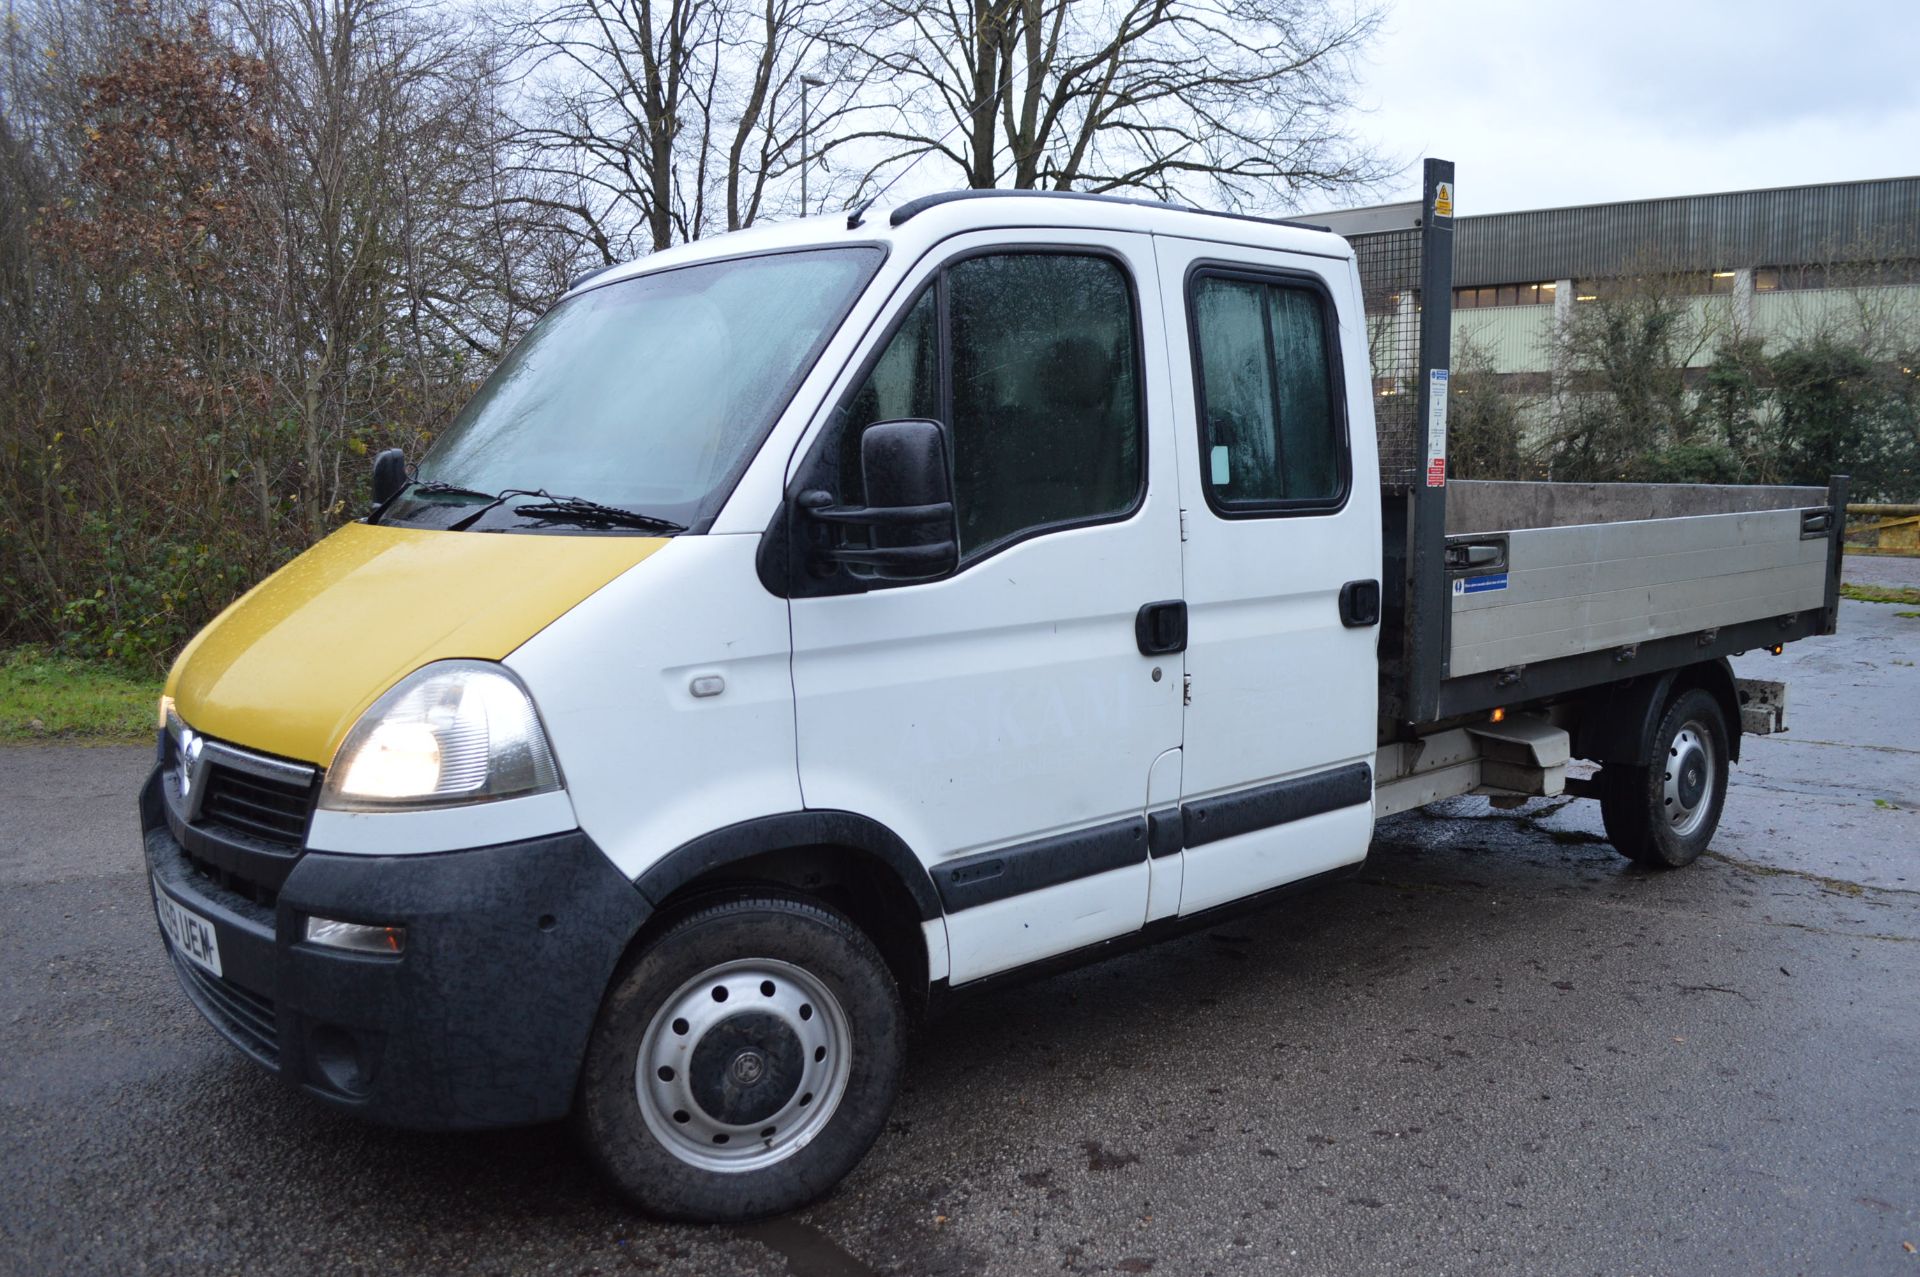 2009/59 REG VAUXHALL MOVANO 3500 CDTI LWB DOUBLE CAB TIPPER, SHOWING 2 FORMER KEEPERS *NO VAT* - Image 3 of 18